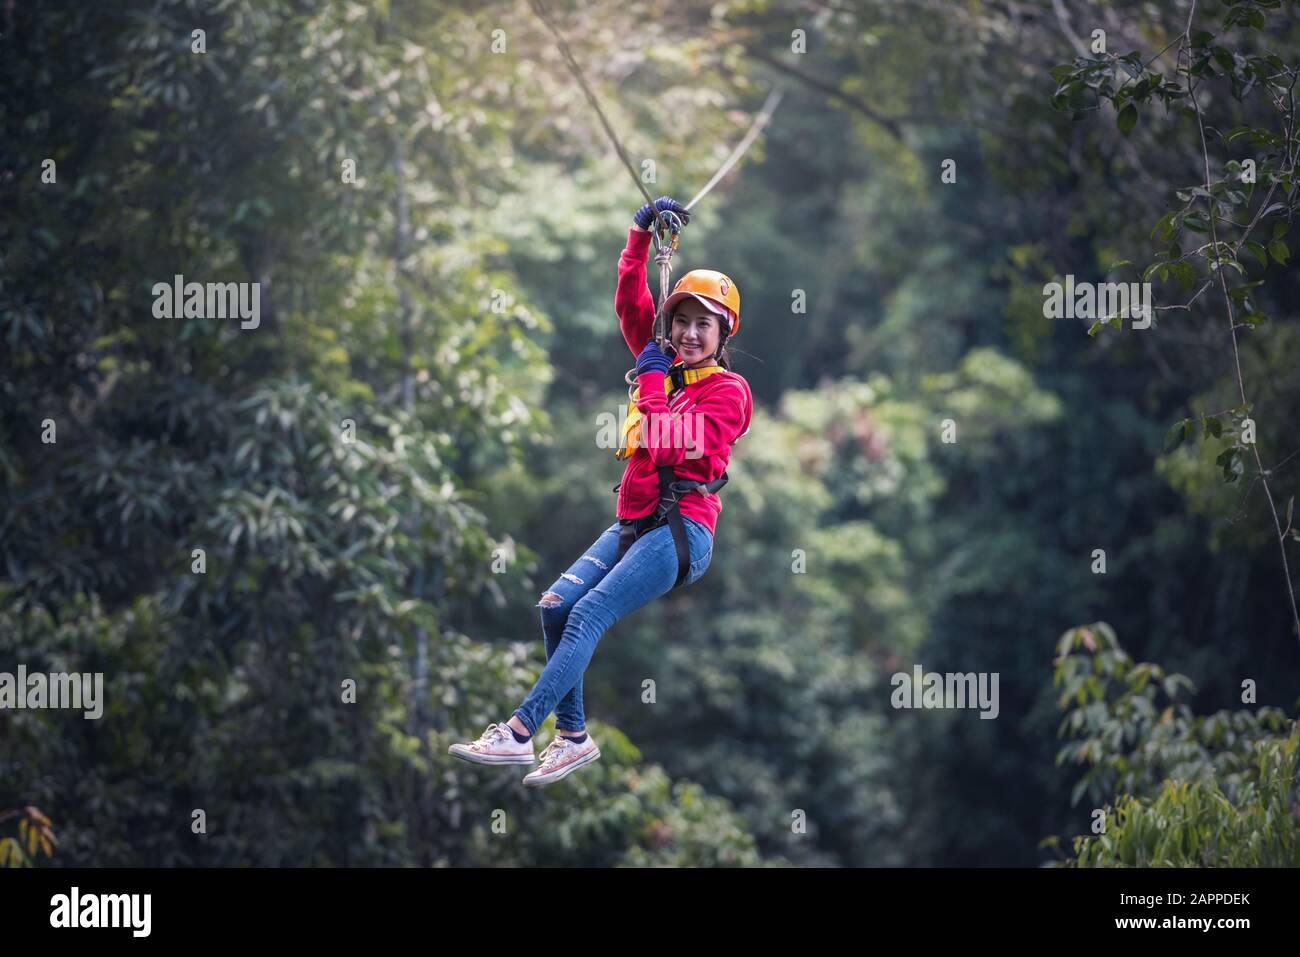 Frau Tourist Wearing Casual Clothing On Zip Line Oder Canopy Experience In Laos Rainforest, Asien Stockfoto